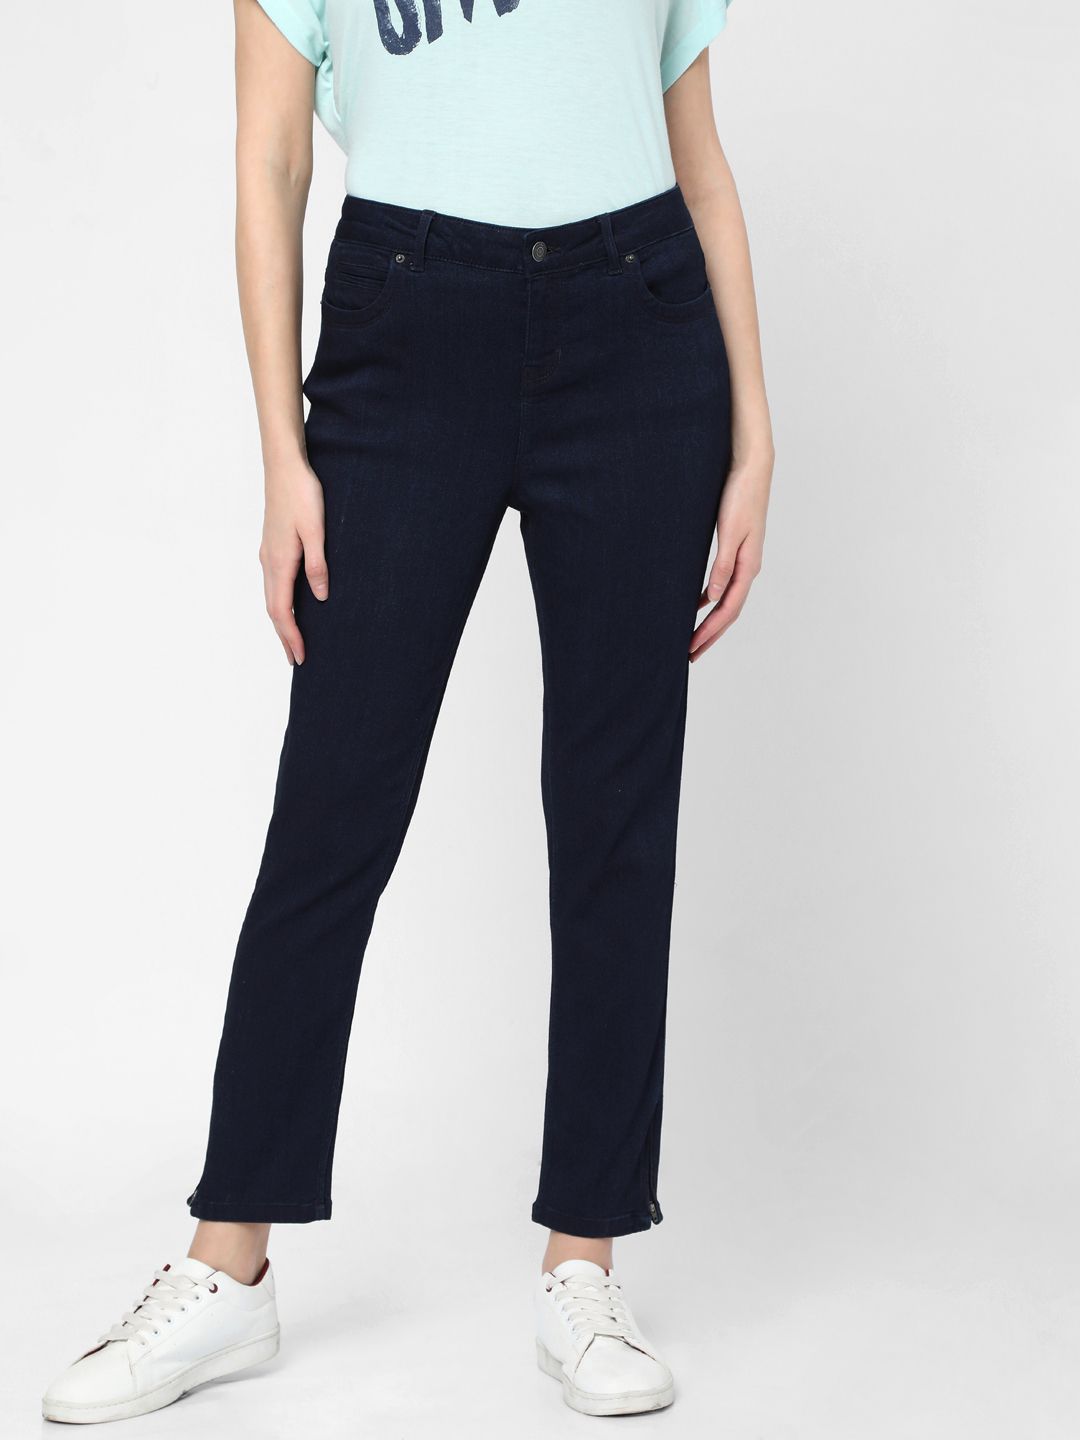 Vero Moda Women Navy Blue Skinny Fit Mid Rise Clean look Stretchable Jeans Price in India